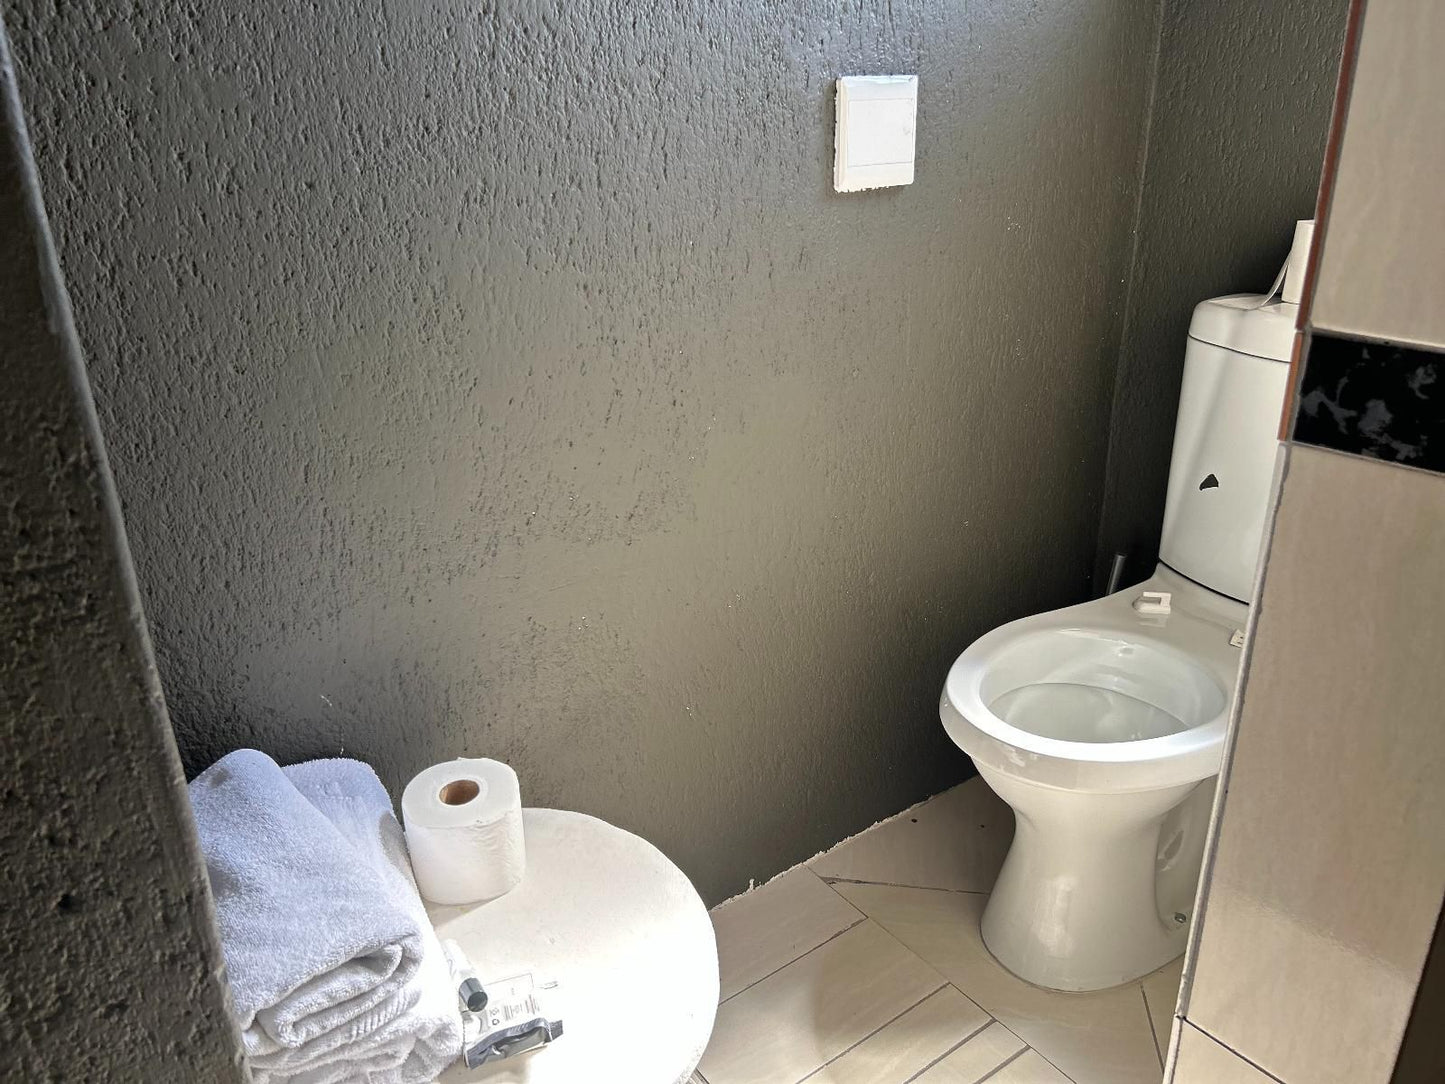 Mihandzu Guest House Hazyview Mpumalanga South Africa Unsaturated, Bathroom